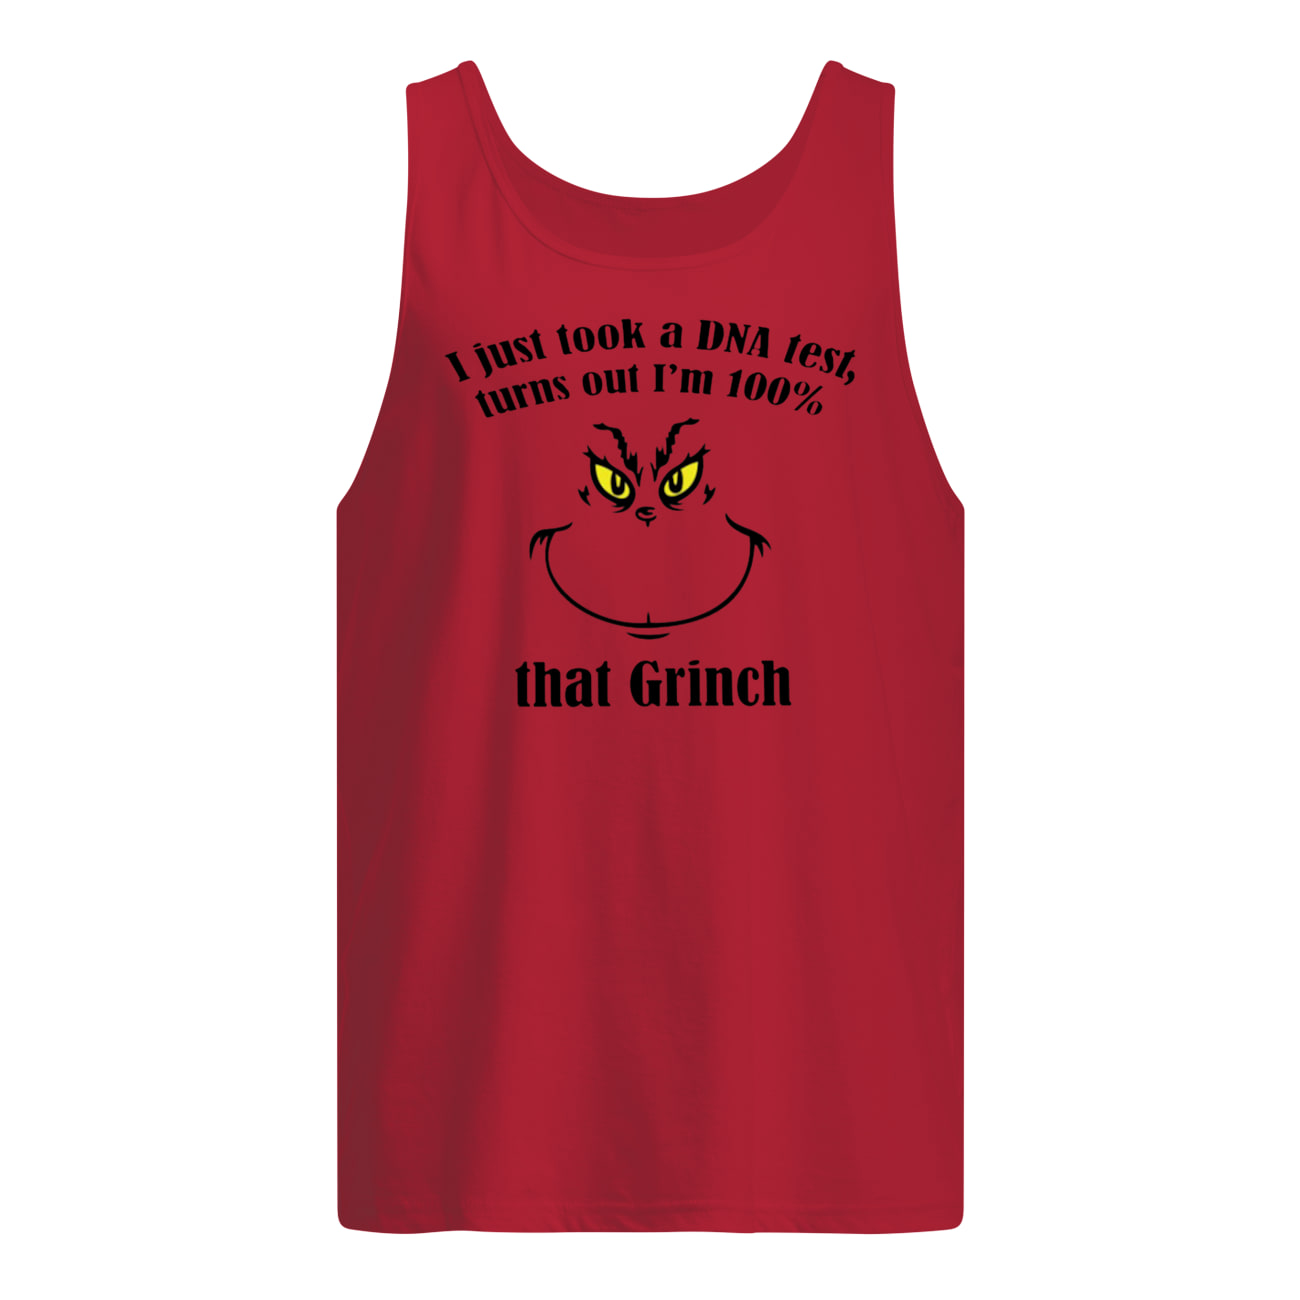 Just took a dna test turns out I'm 100% that grinch tank top